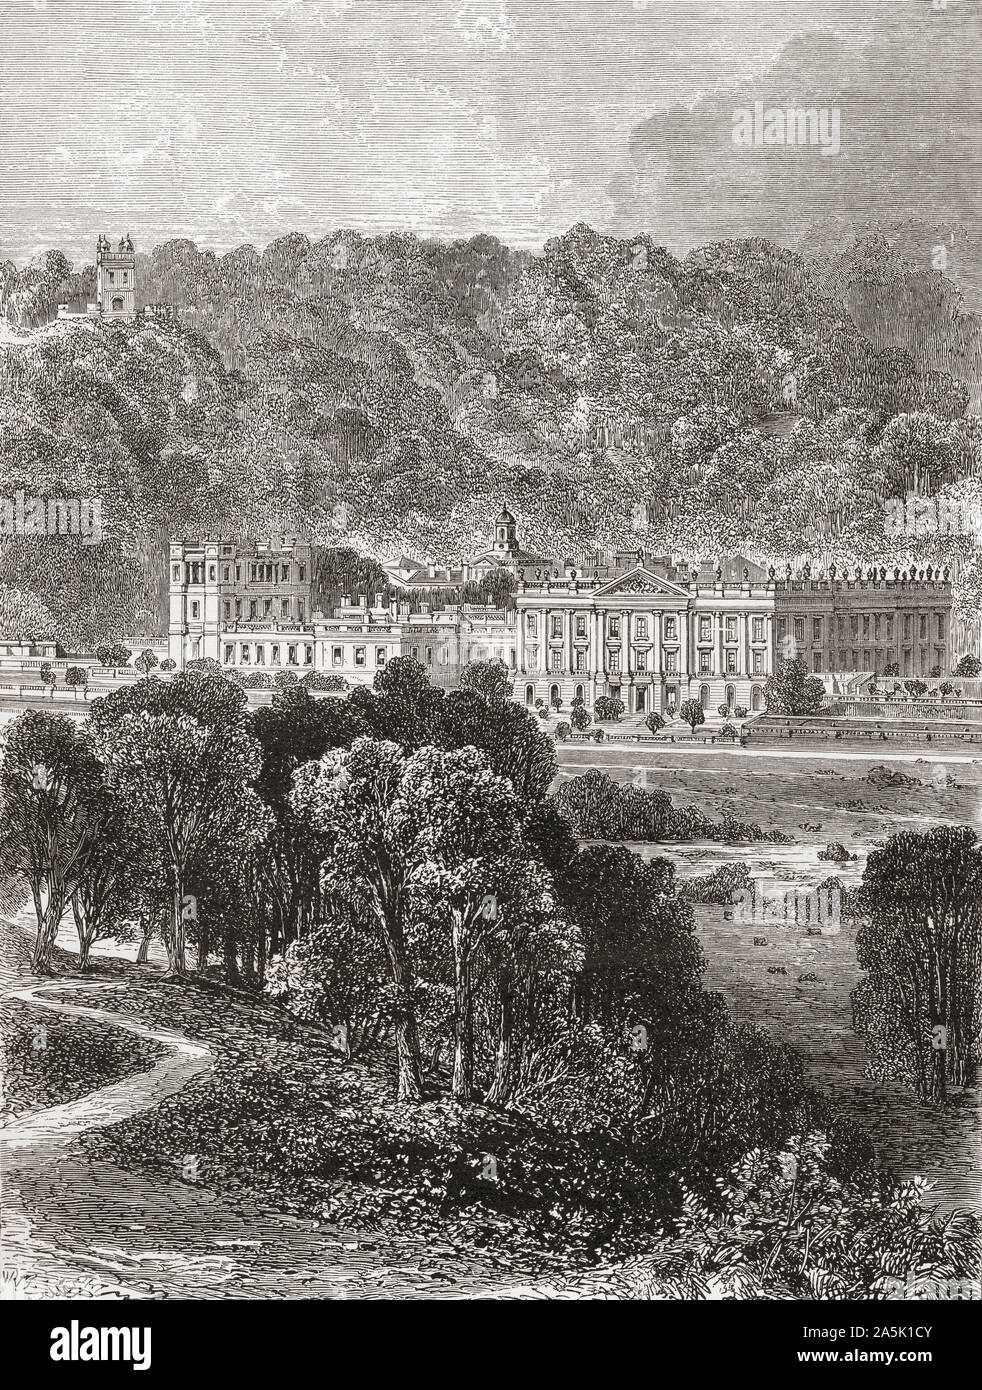 Chatsworth House, Derbyshire, England, seen here in the 19th century. From English Pictures, published 1890. Stock Photo